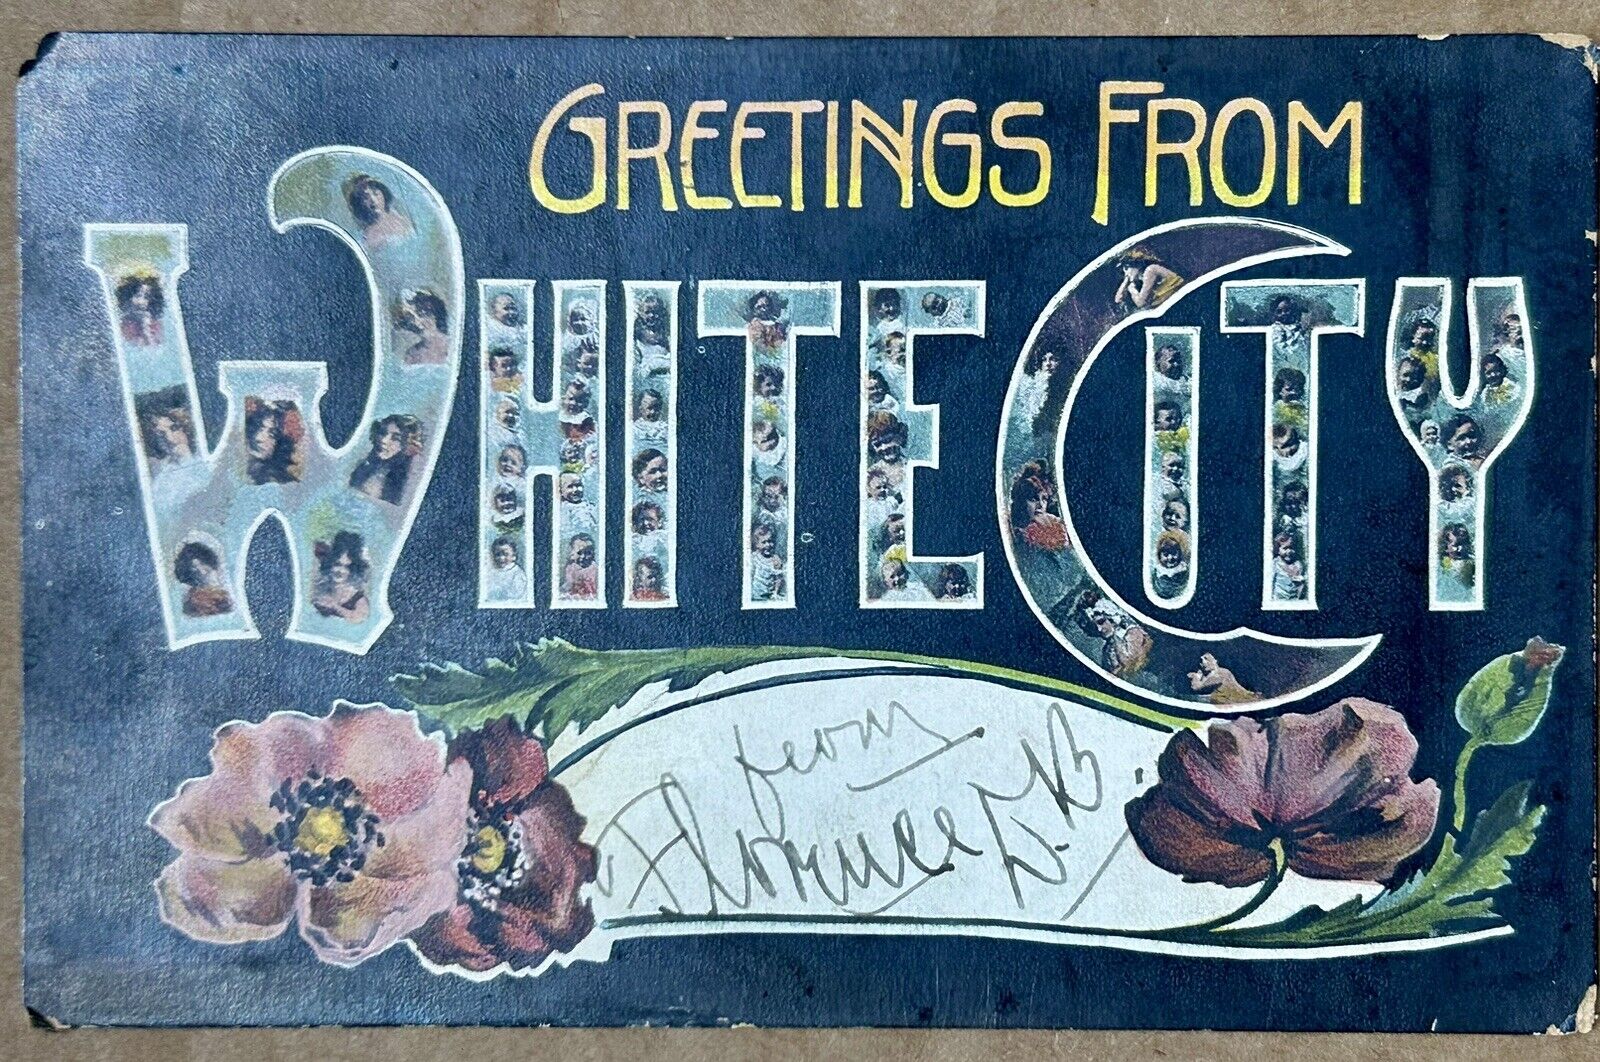 Greetings from White City. 1908 Vintage Postcard